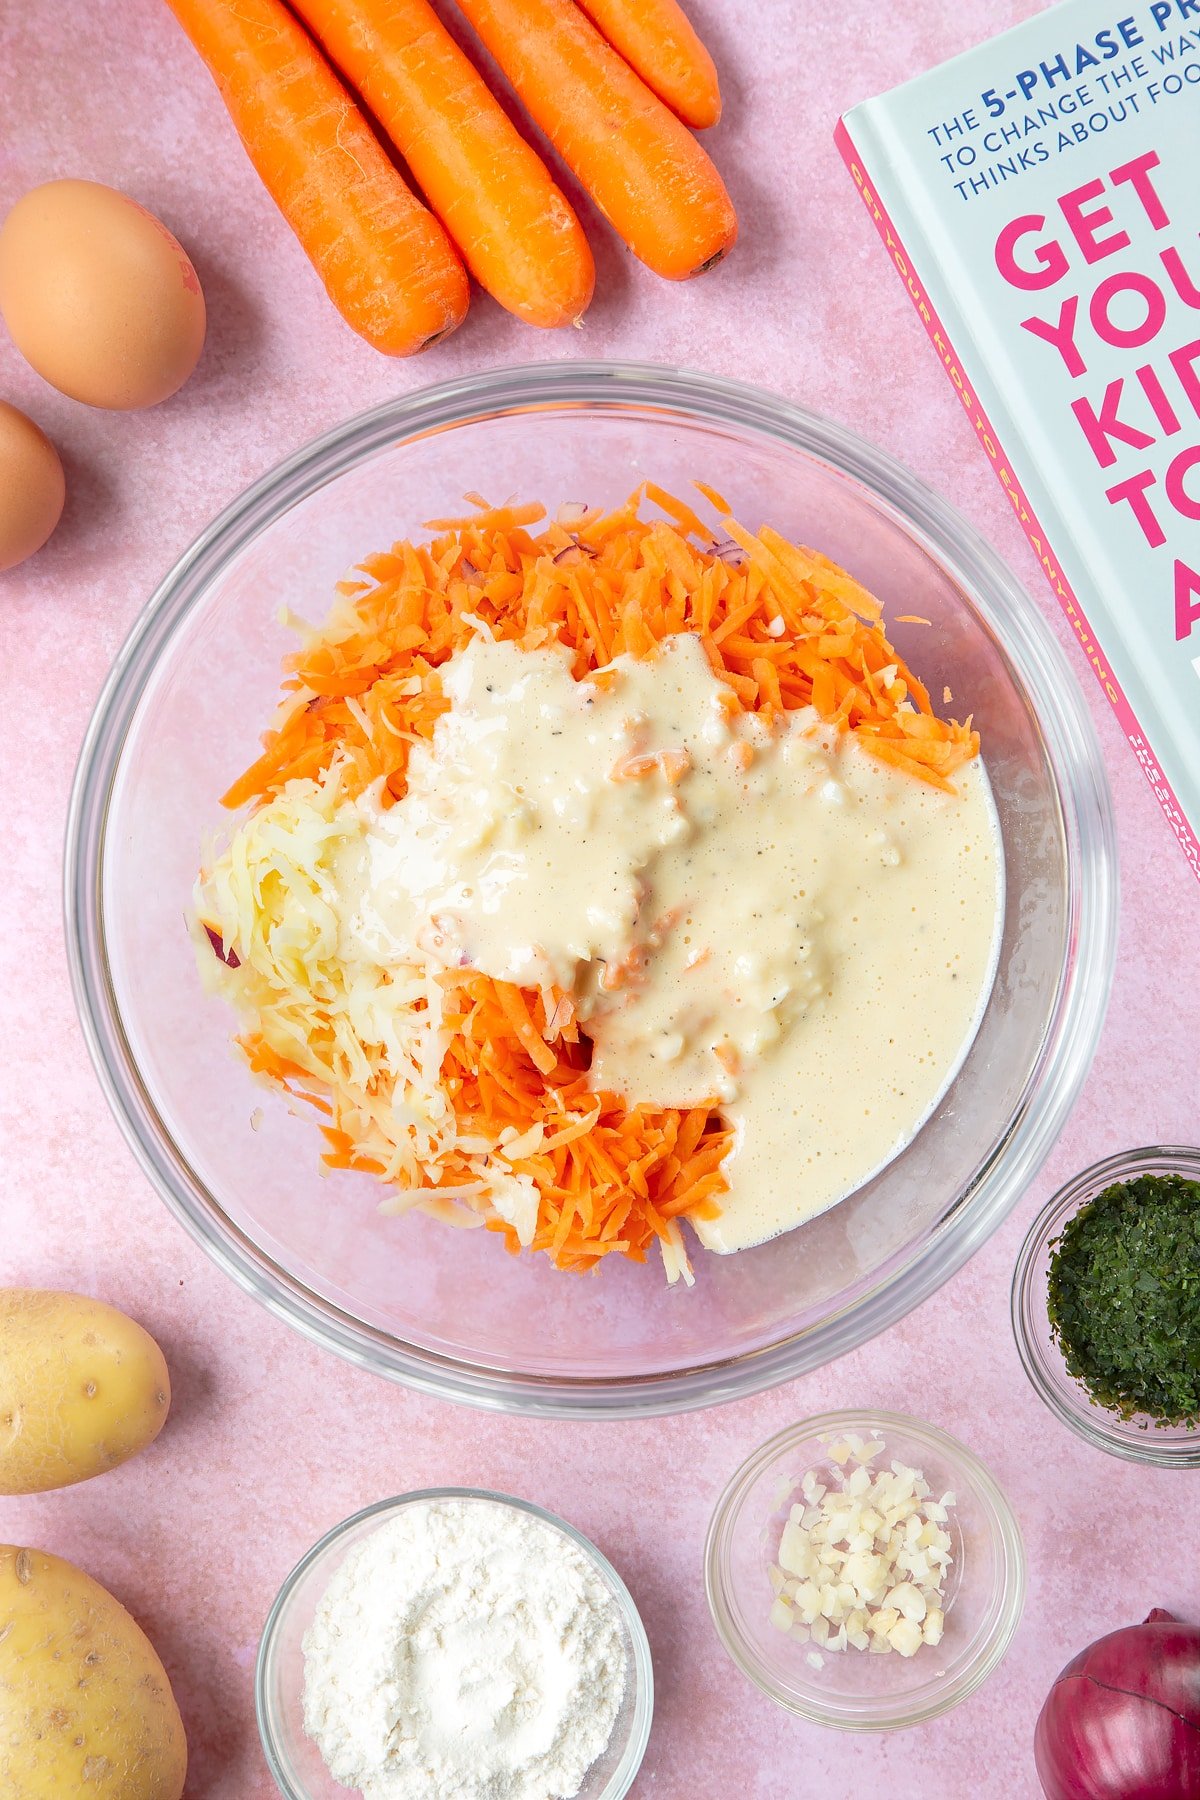 Grated carrot, potato and red onion topped with a batter made from flour, eggs, salt and pepper in a mixing bowl. The bowl is surrounded by ingredients to make carrot patties.